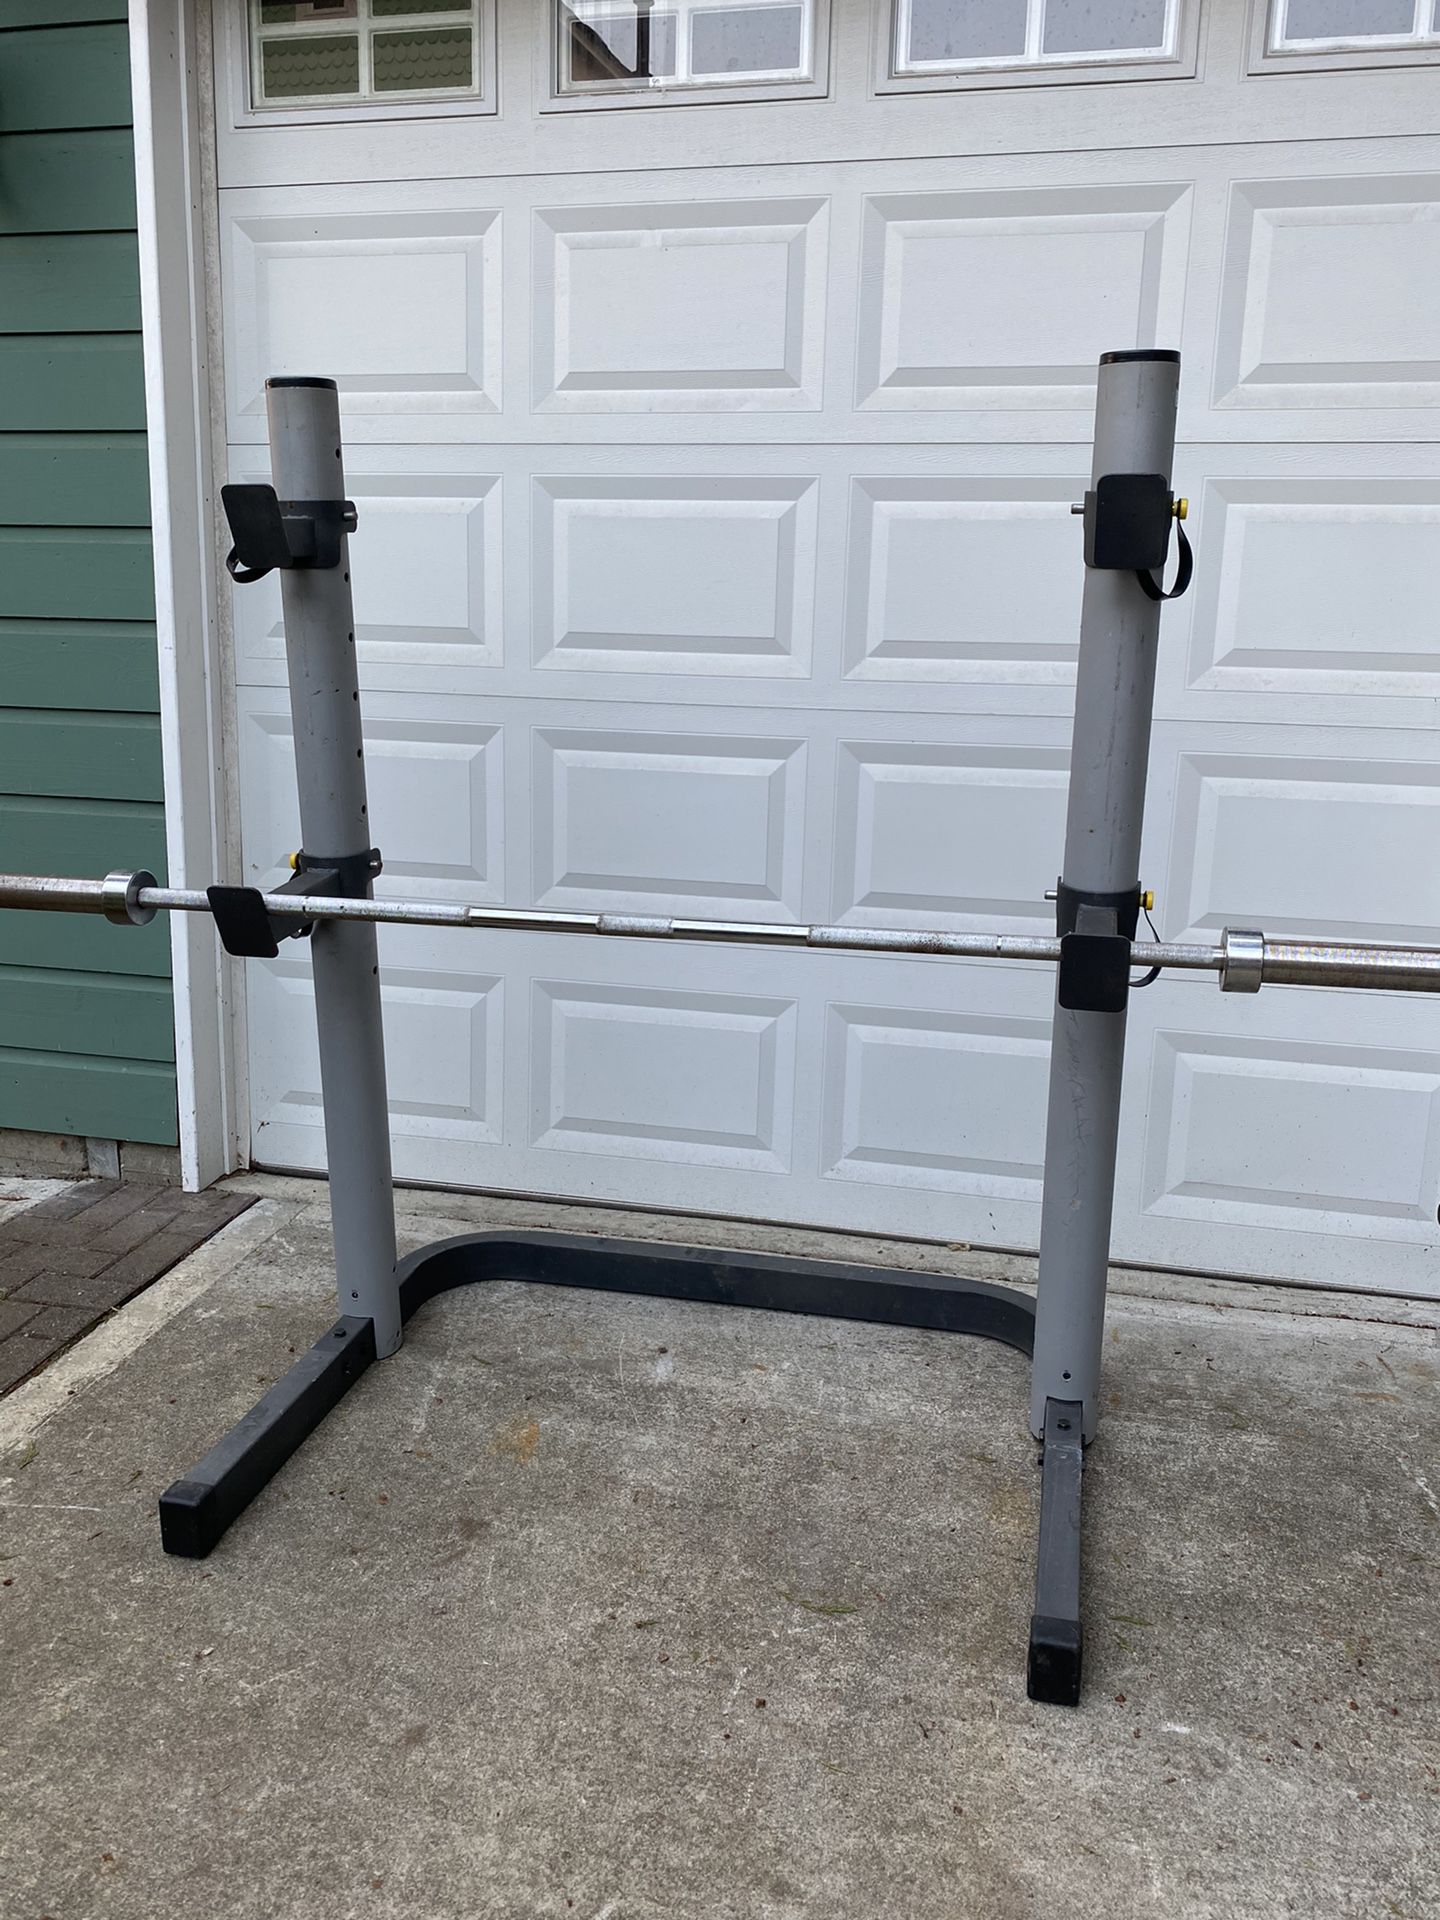 Adjustable Squat Rack for home gym (Olympic bar not included)